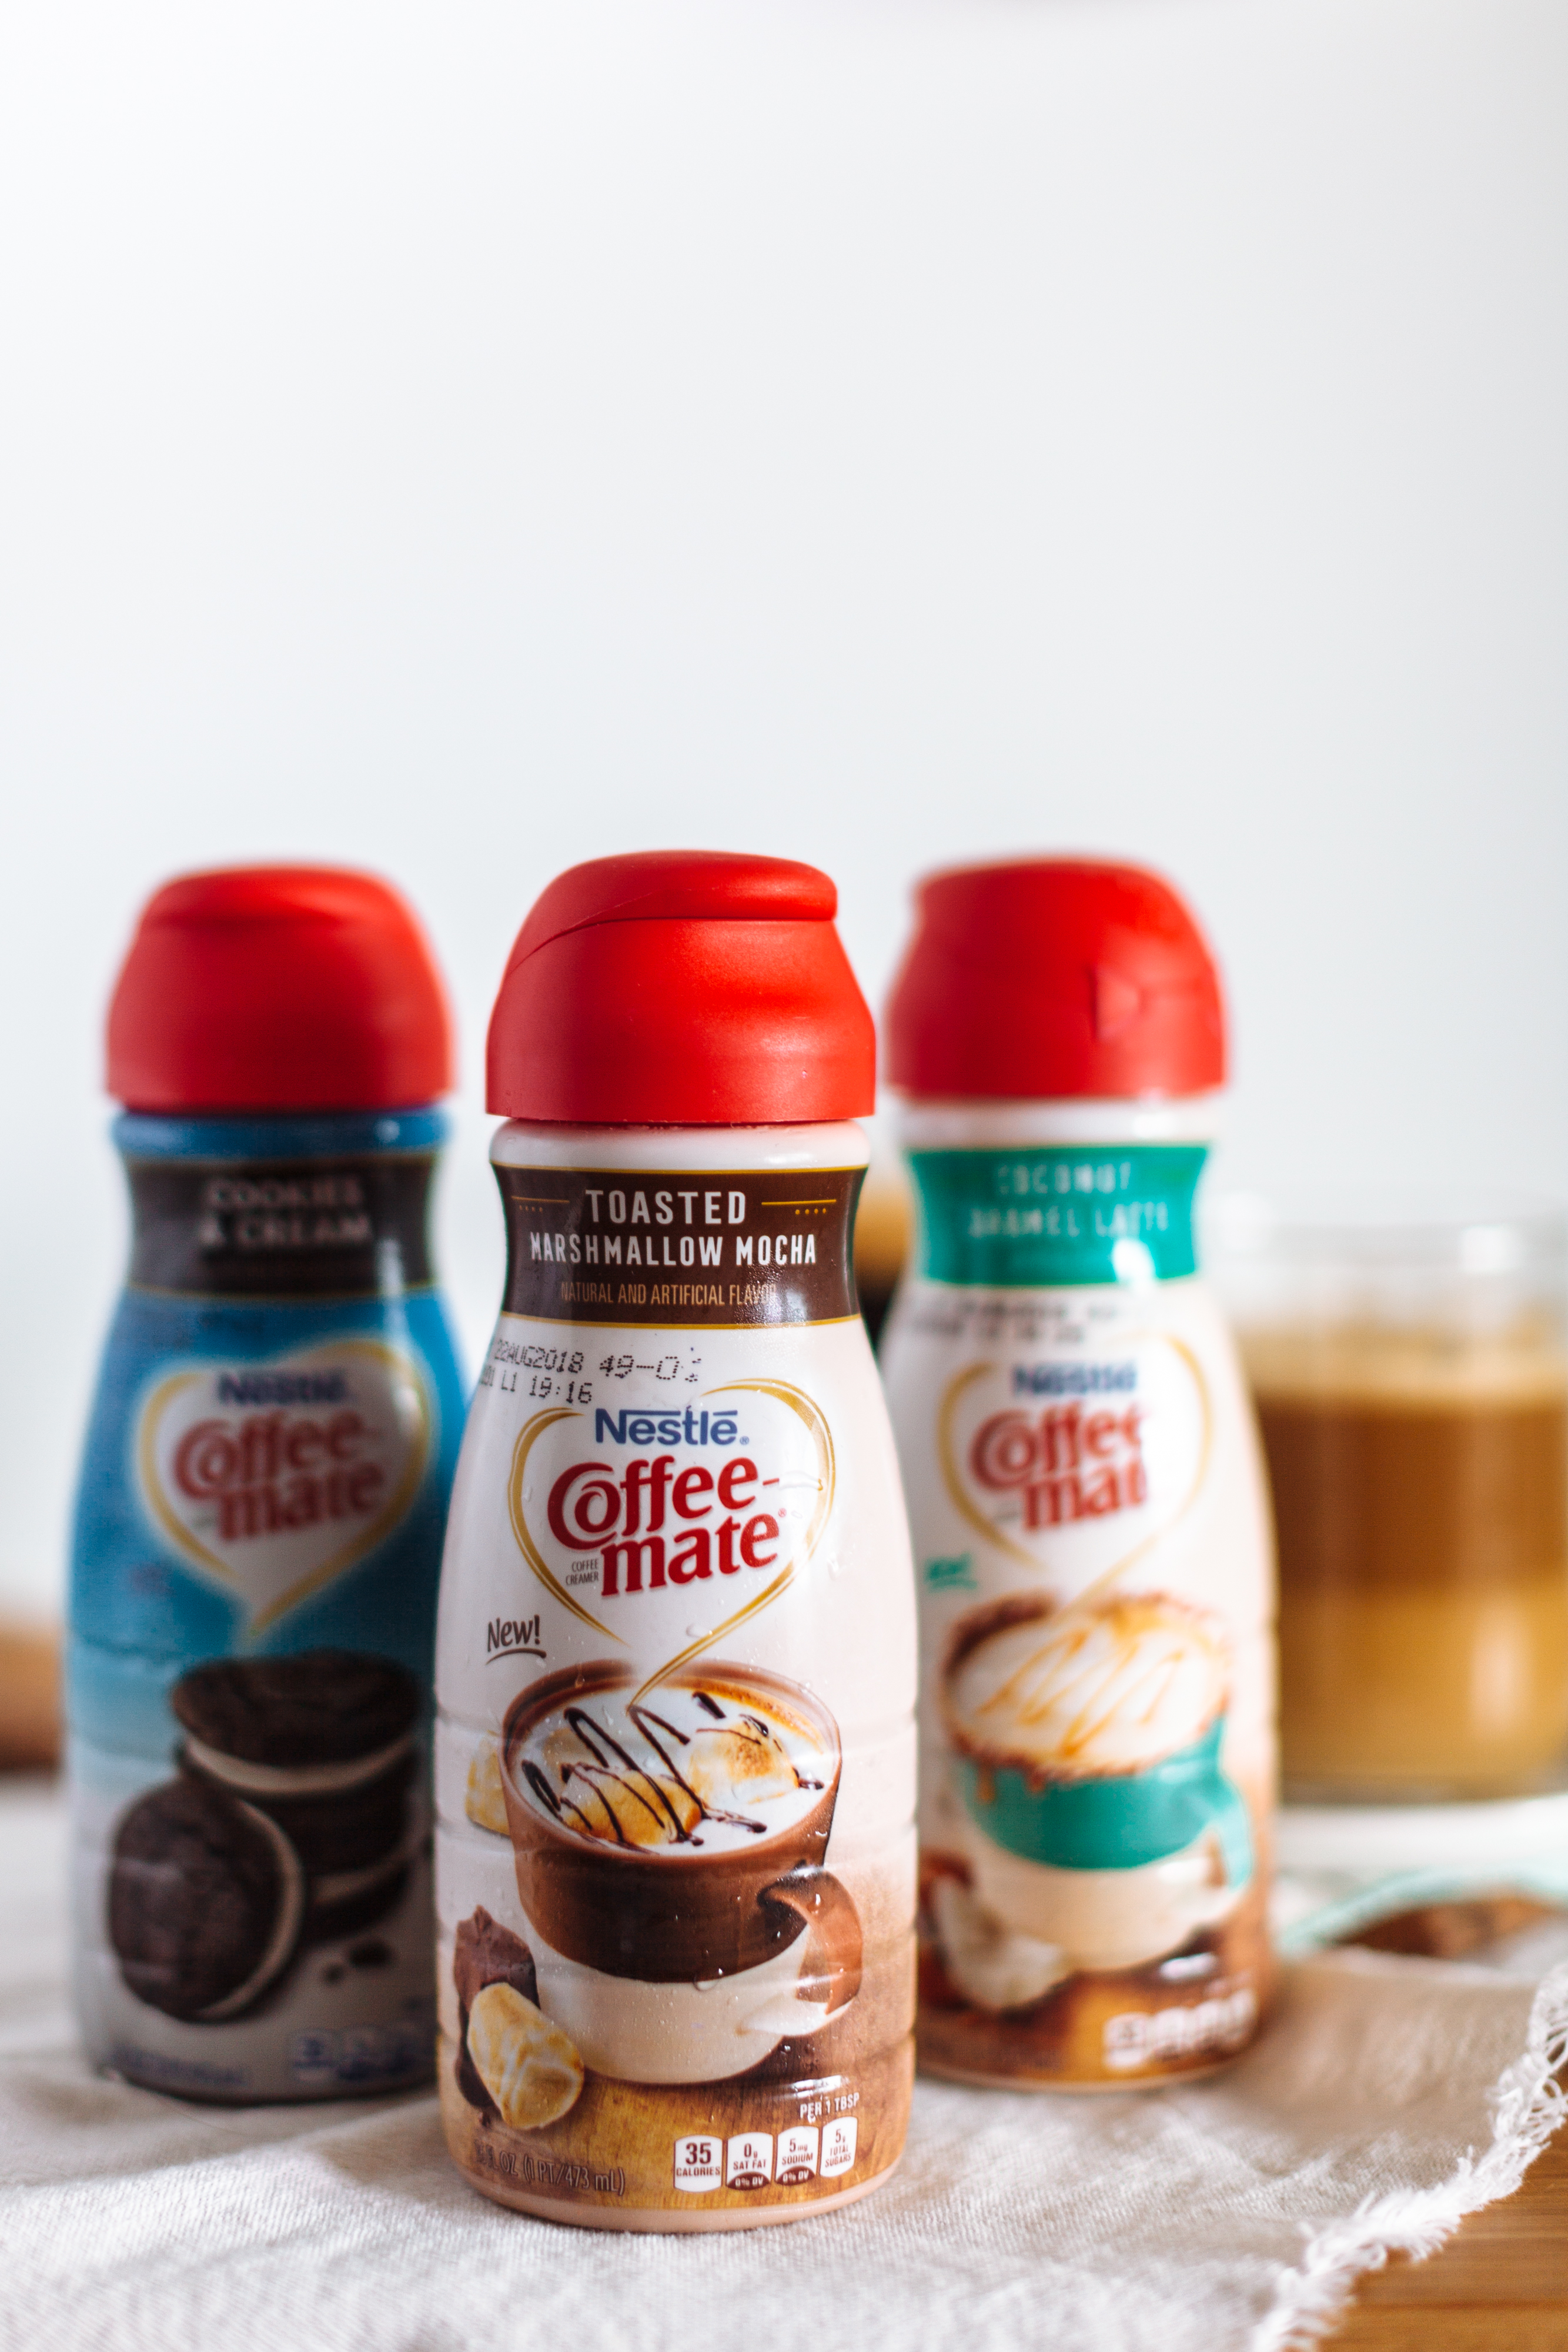 A gal pal coffee date with Coffee-Mate creamers | bygabriella.co